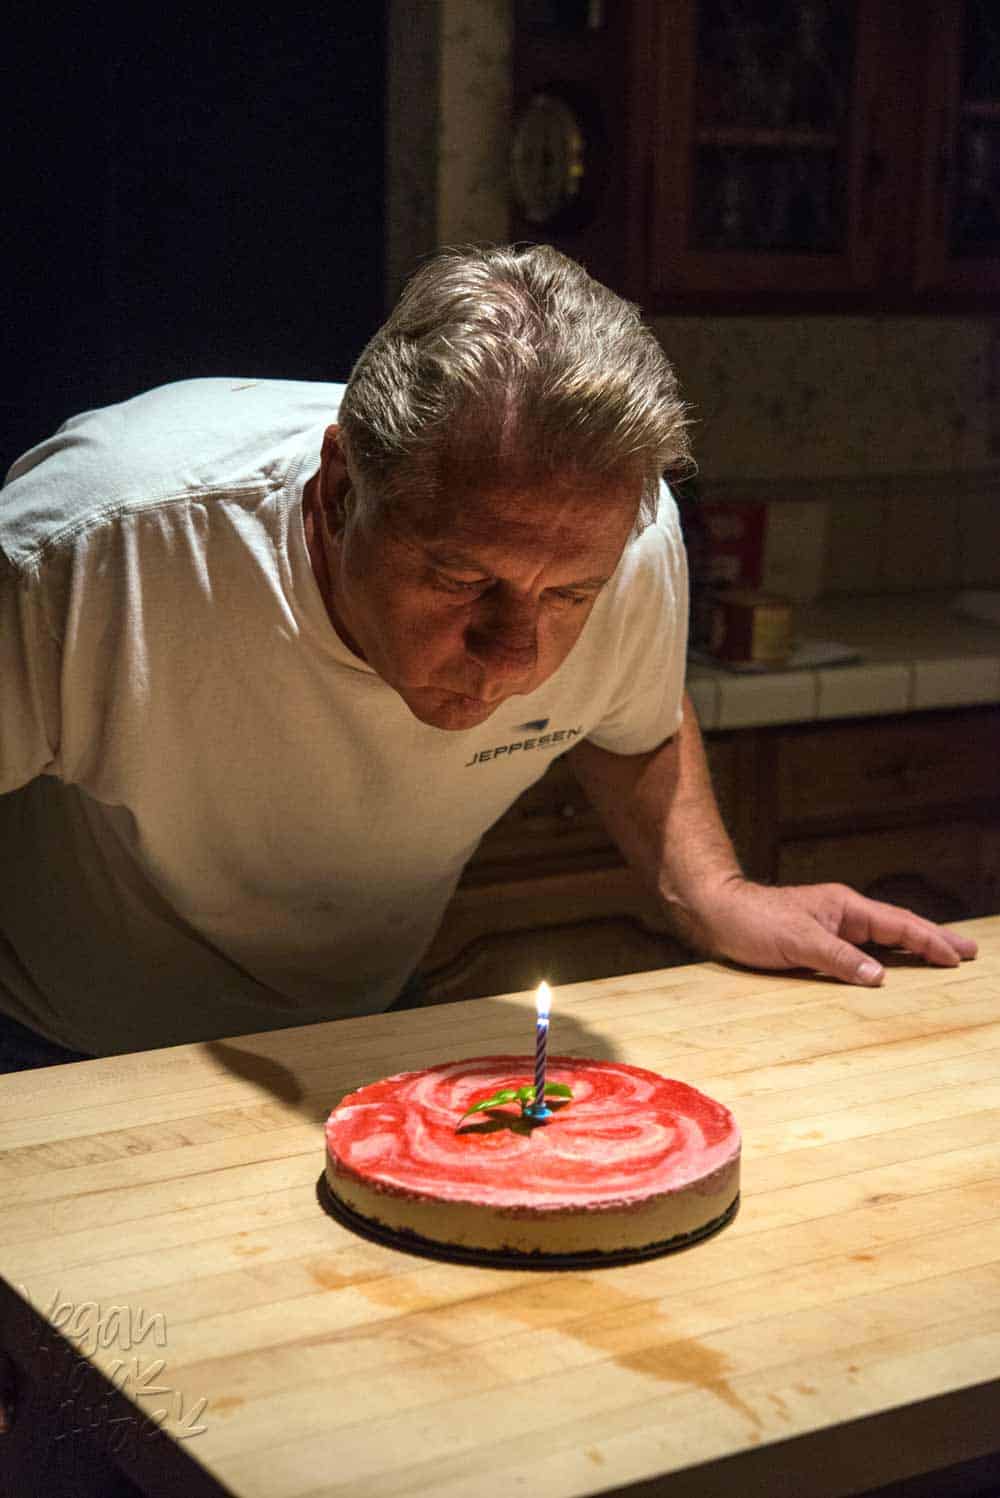 Older gentleman blowing out birthday candle on cheesecake